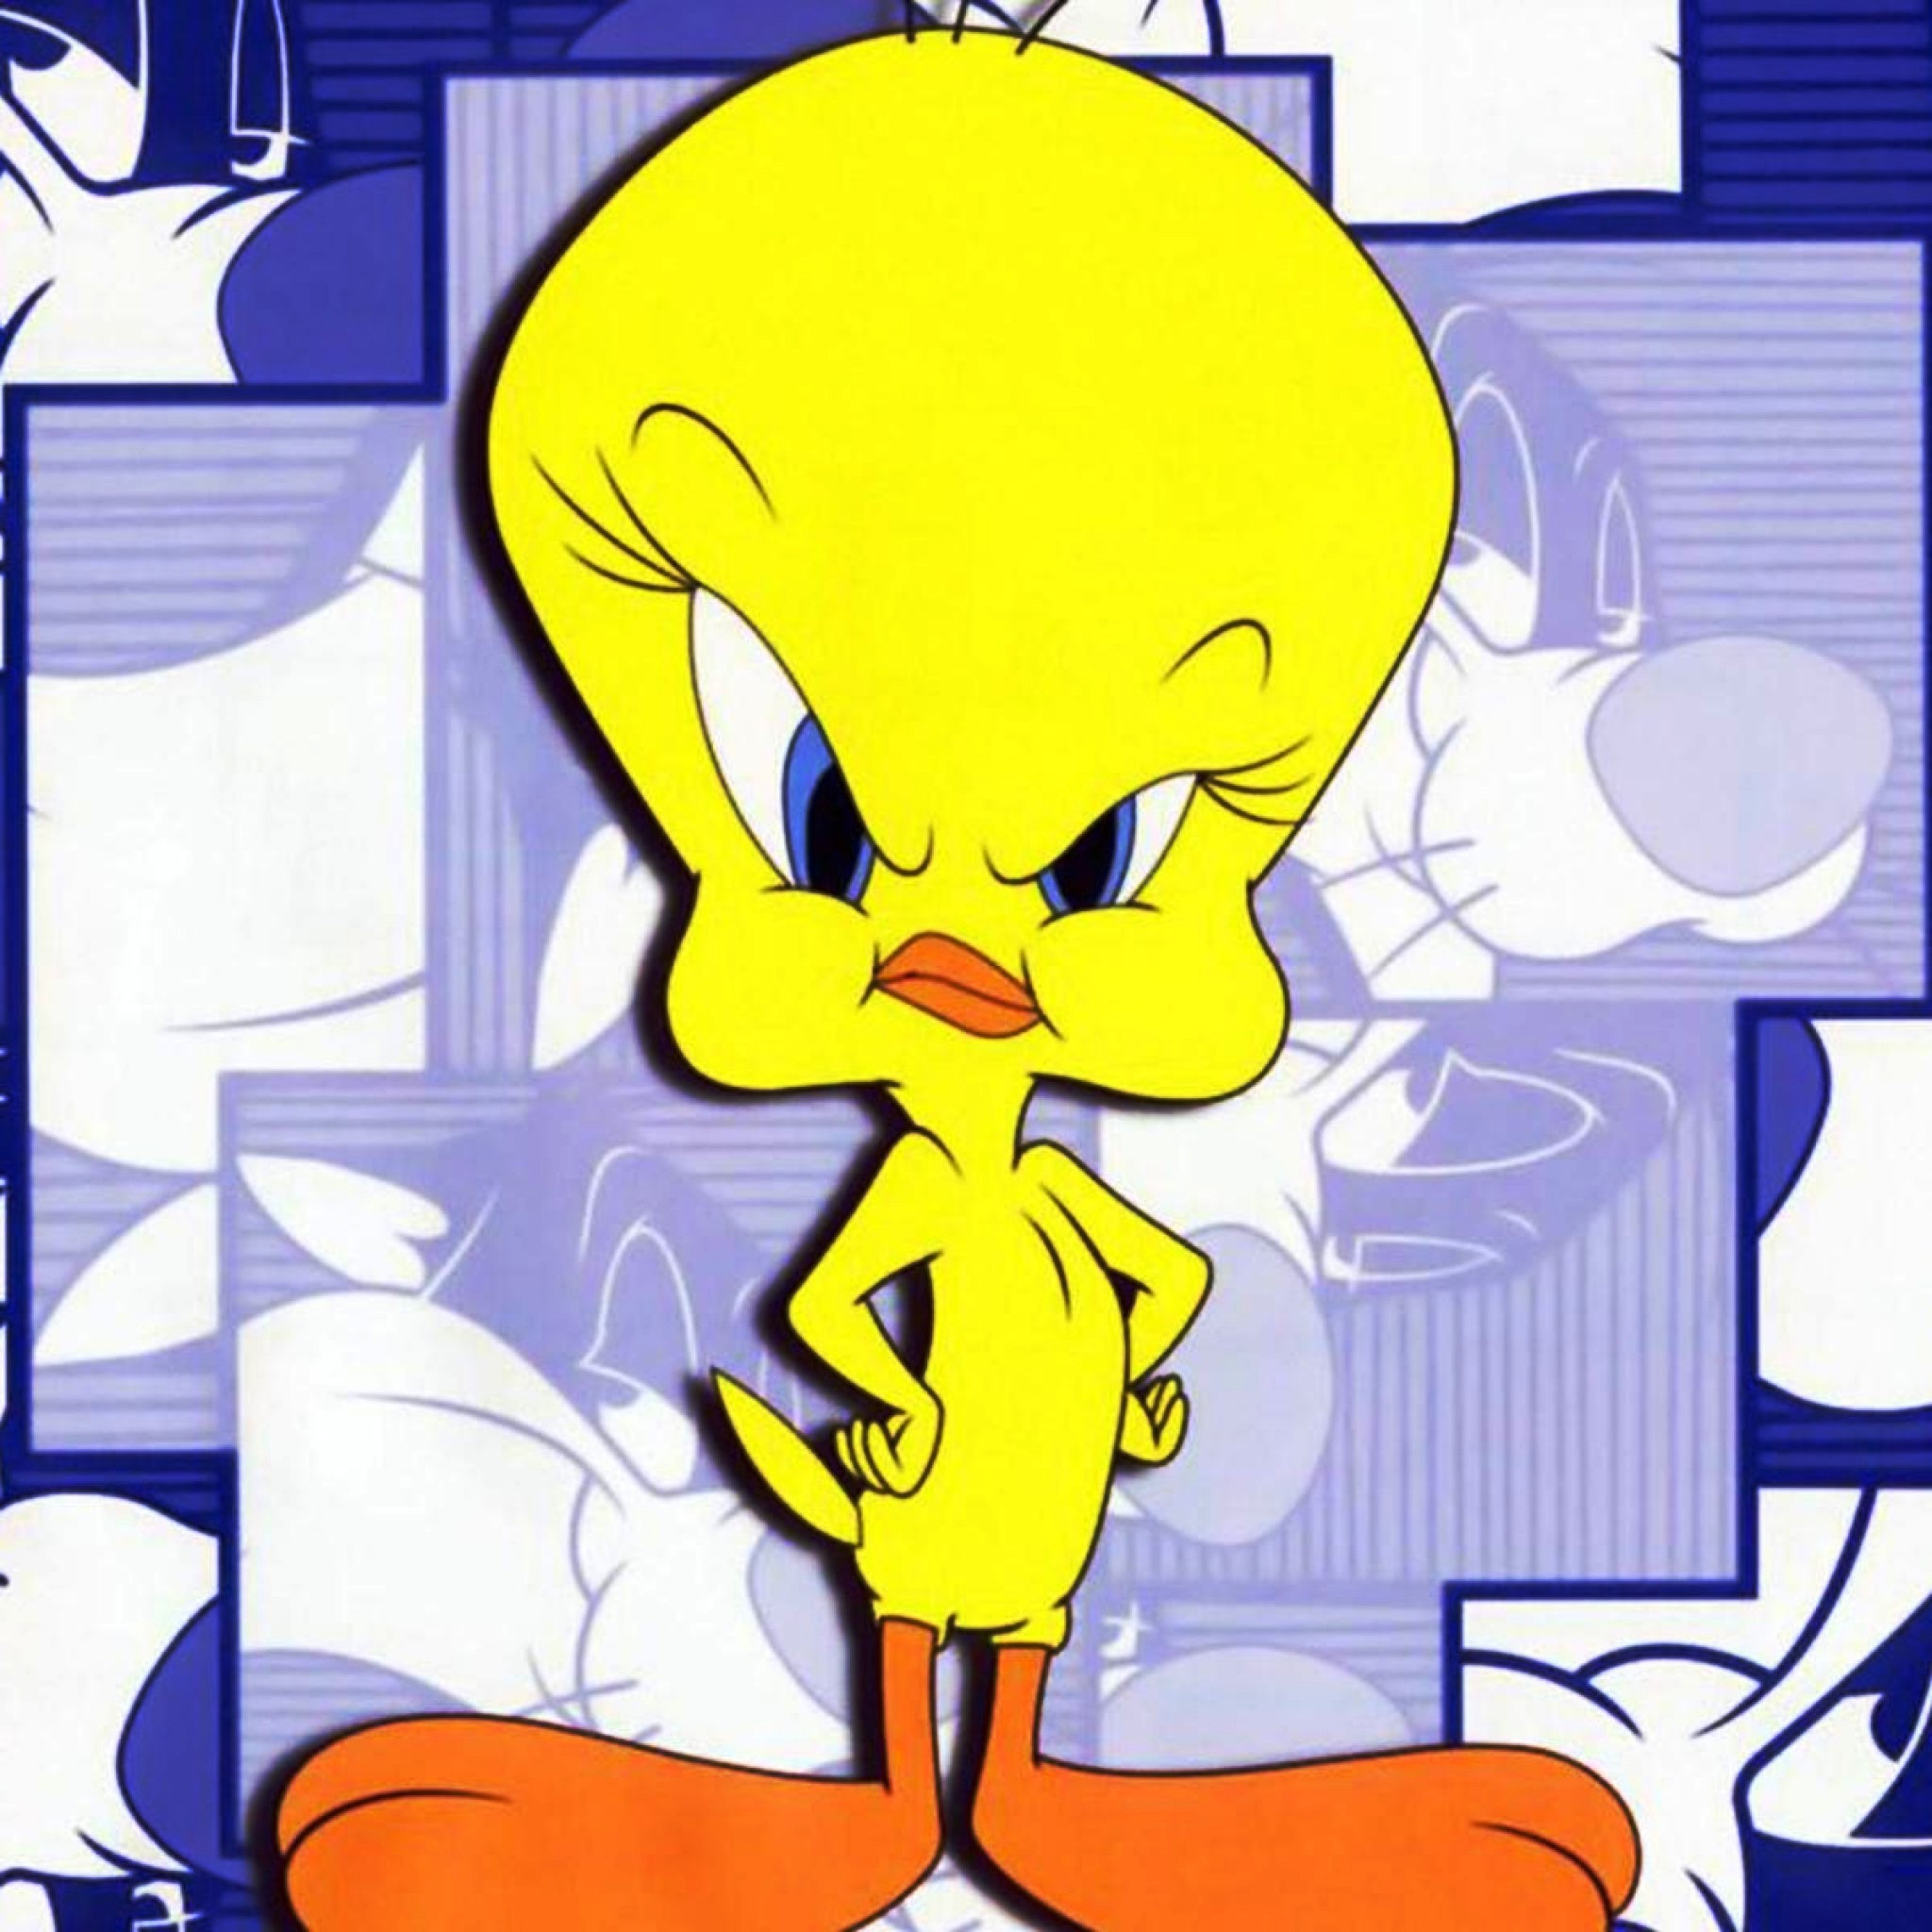 Free Download Tweety Wallpaper Picture Tweety Wallpaper Wallpaper 48x48 For Your Desktop Mobile Tablet Explore 76 Tweety Wallpapers Free Free Tweety Wallpaper And Screensavers